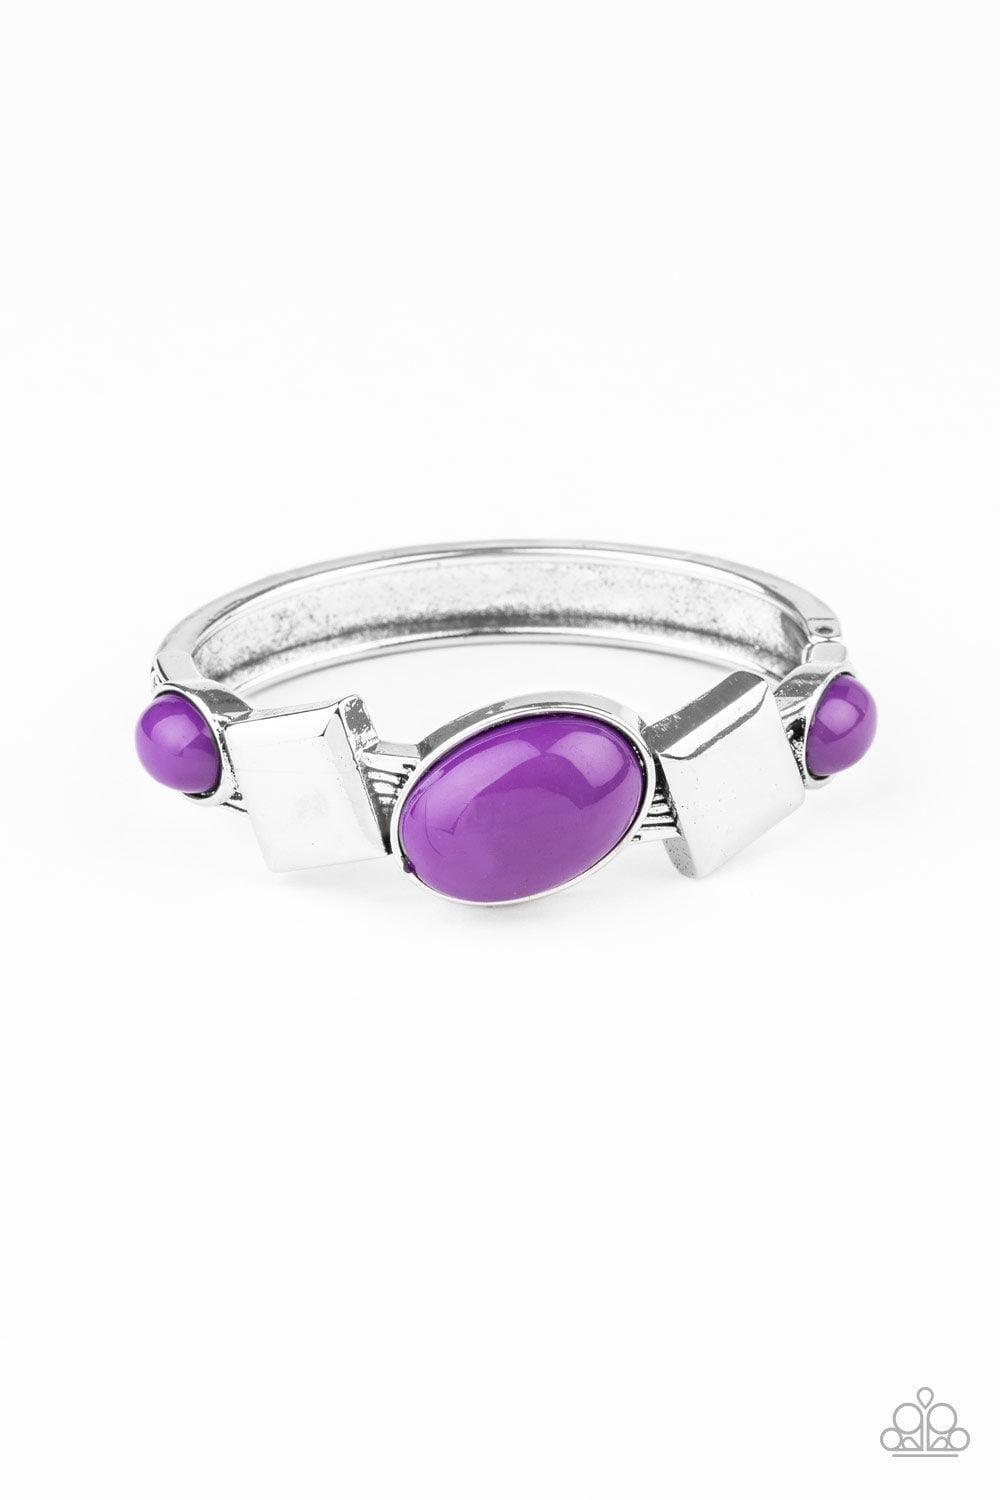 Paparazzi Accessories - Abstract Appeal - Purple Hinged Bracelet - Bling by JessieK